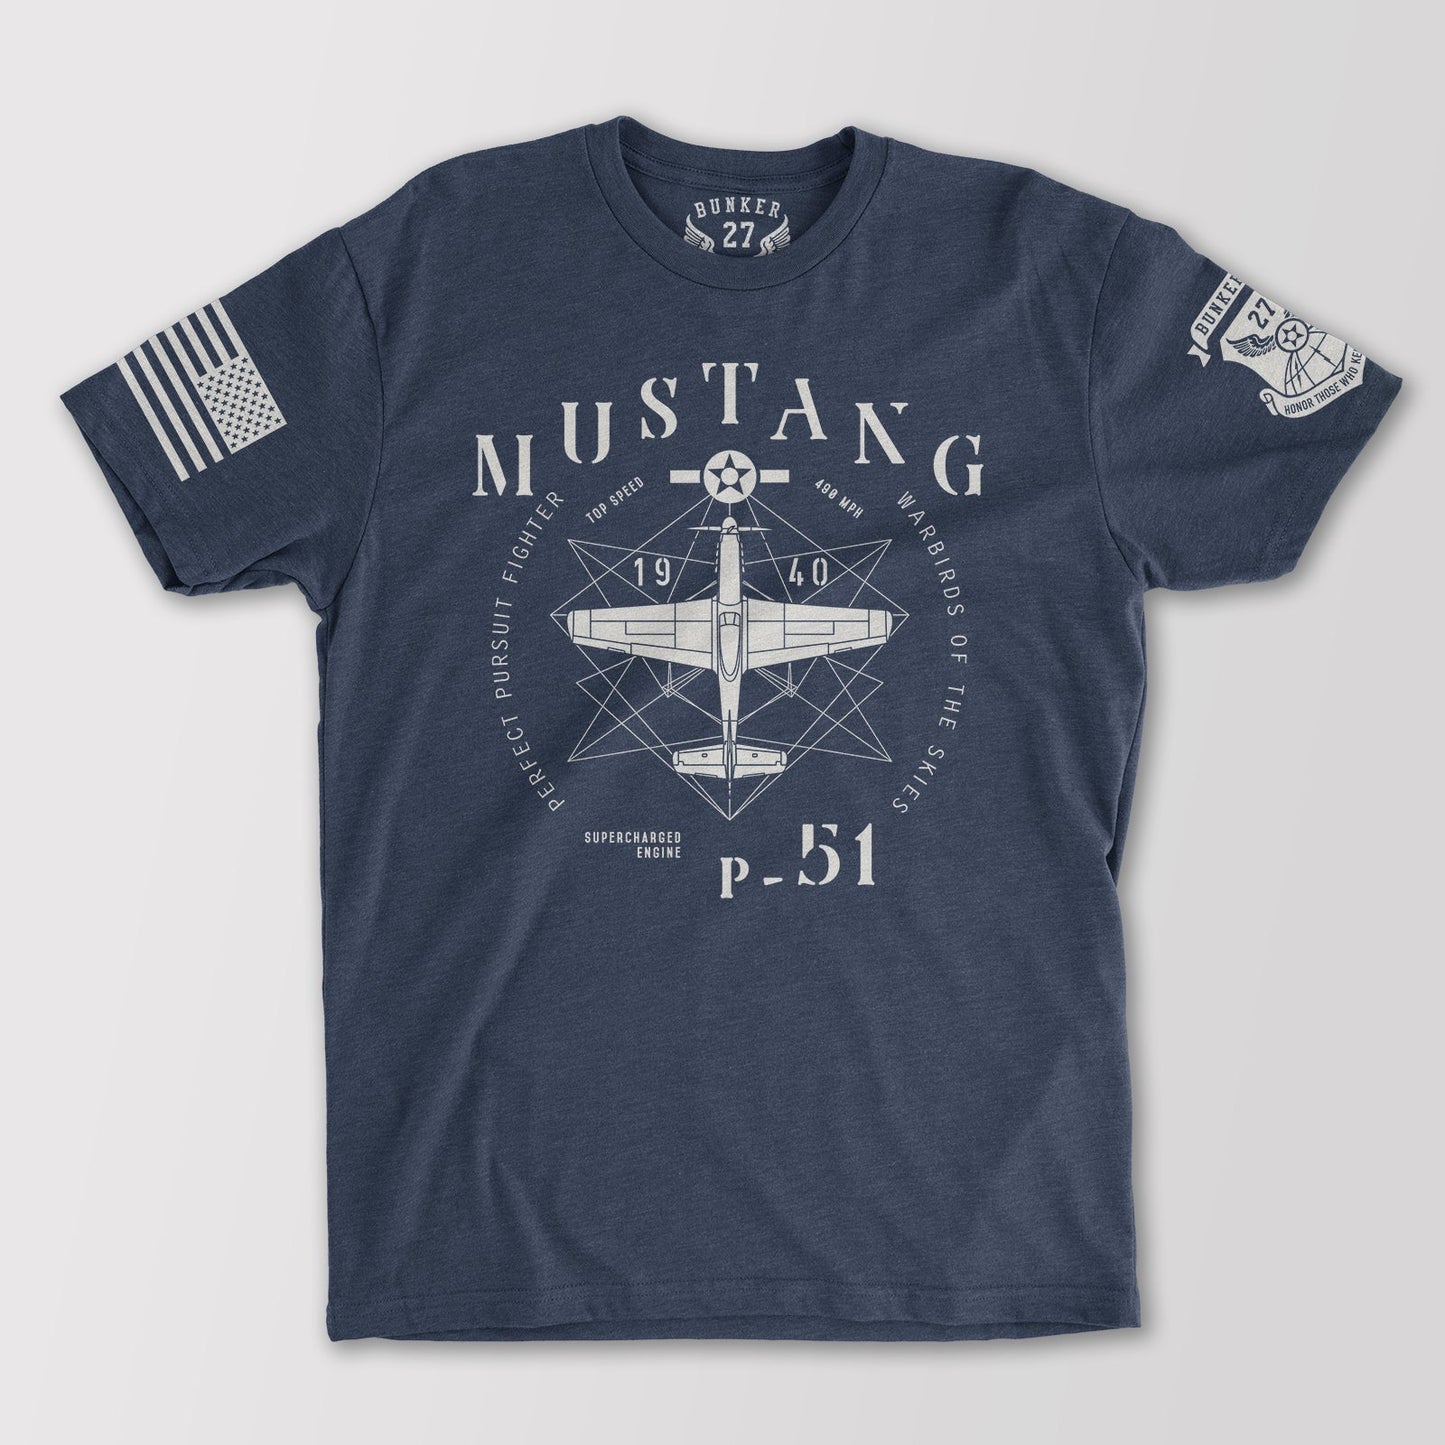 P-51 Mustang - Warbirds of the Skies T-Shirt